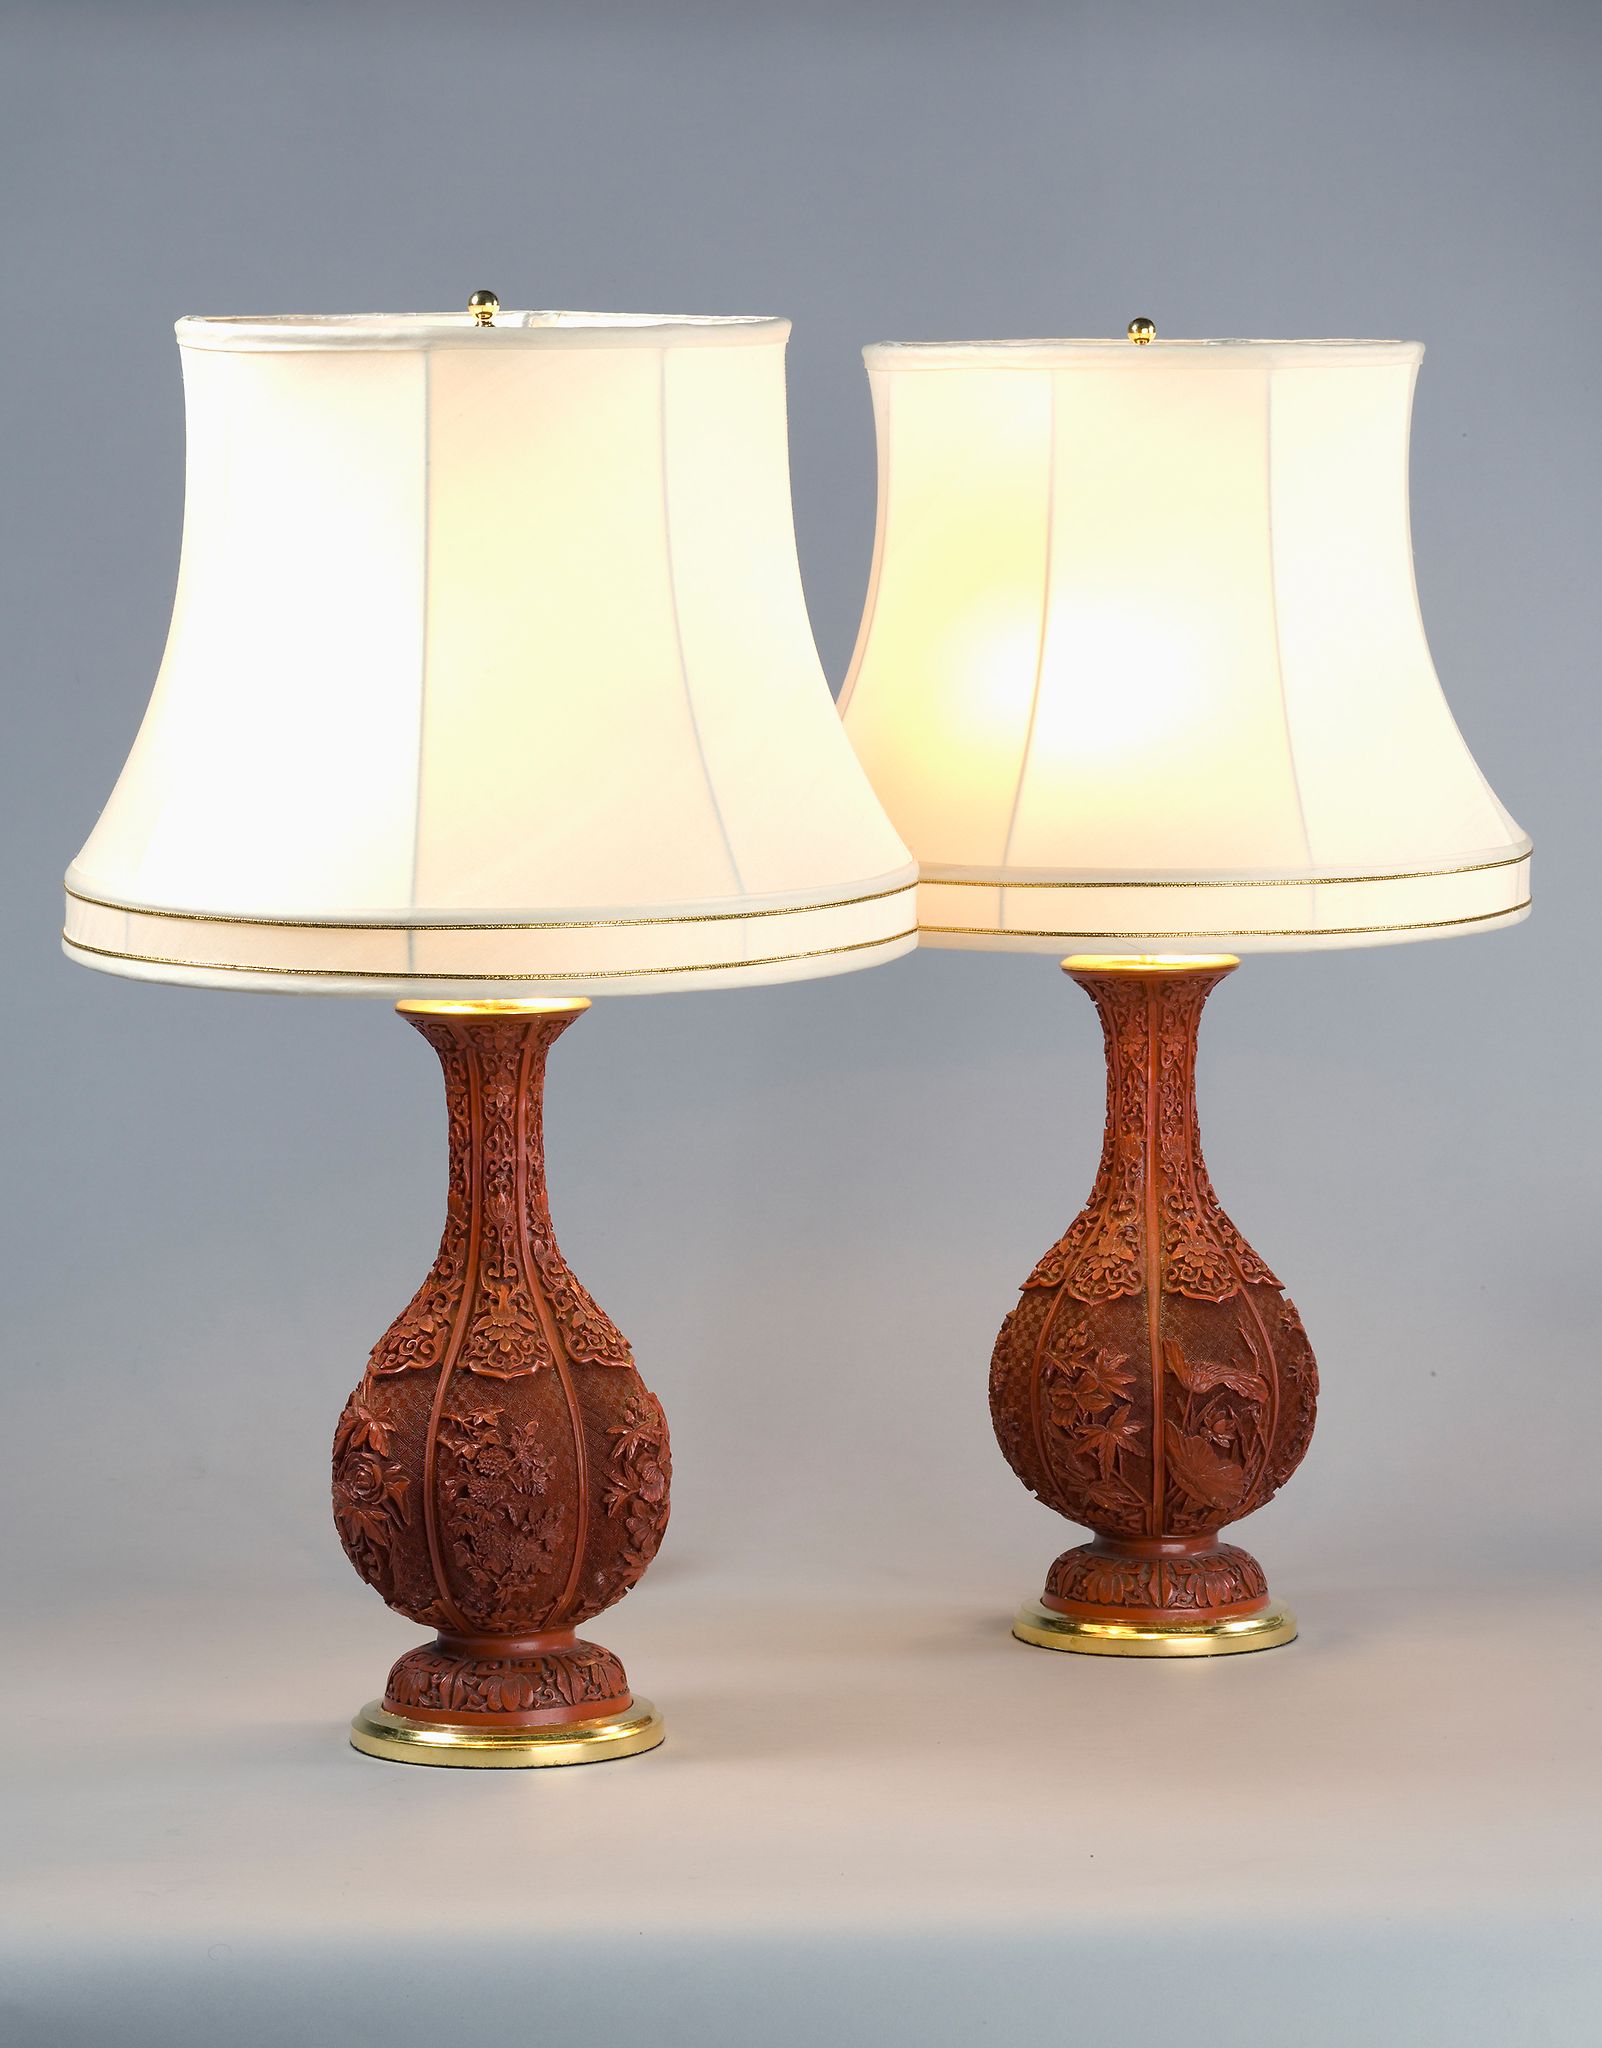 A Pair of Chinese Cinnabar Lacquer Vases Mounted as Lamps A Pair of Chinese Cinnabar Lacquer Vases